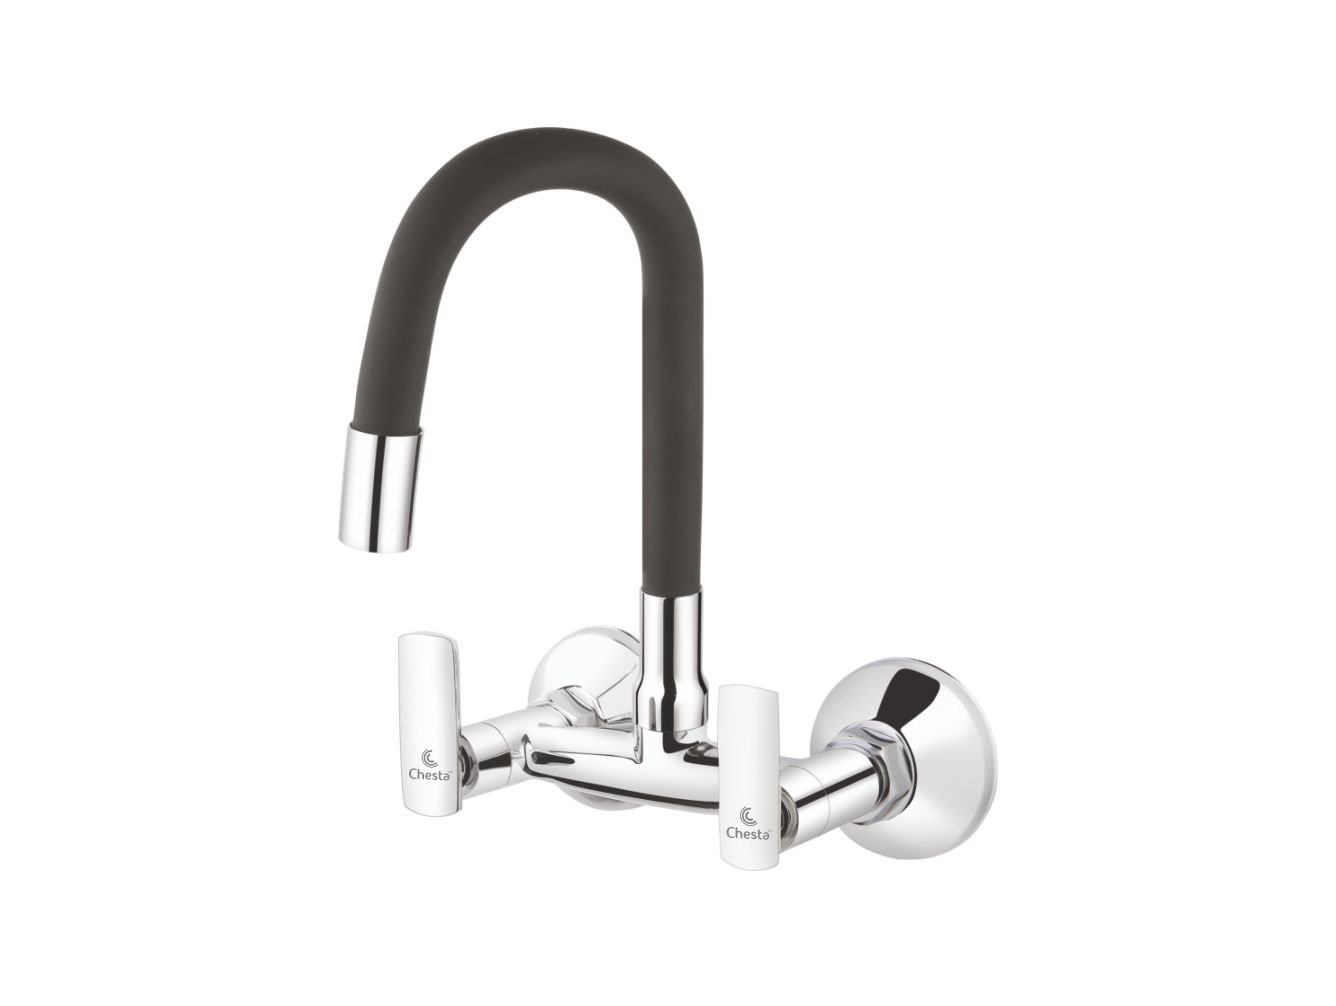 SY - 1019/1020 - Flexible Sink Mixer (Single/Dual Flow) at Chesta